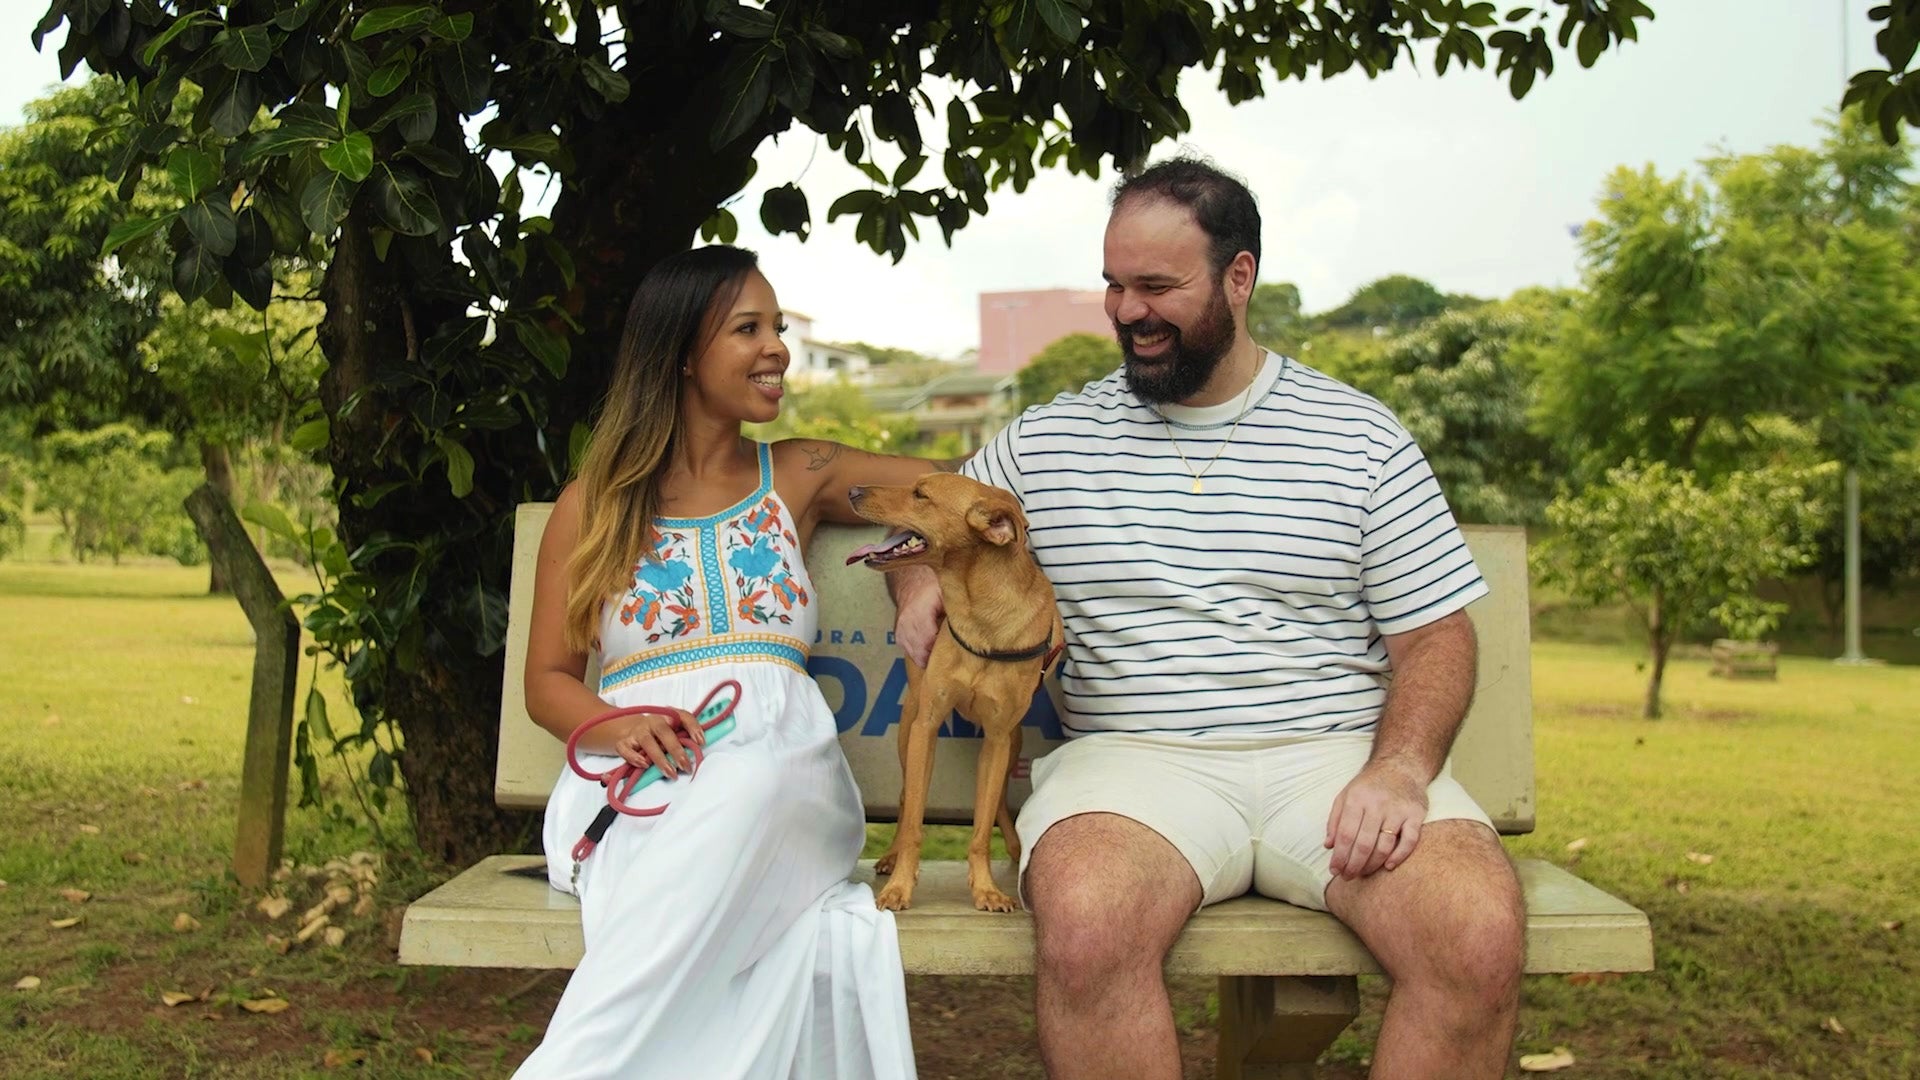 Manuel Da Silva and his wife on a park bench with their dog.